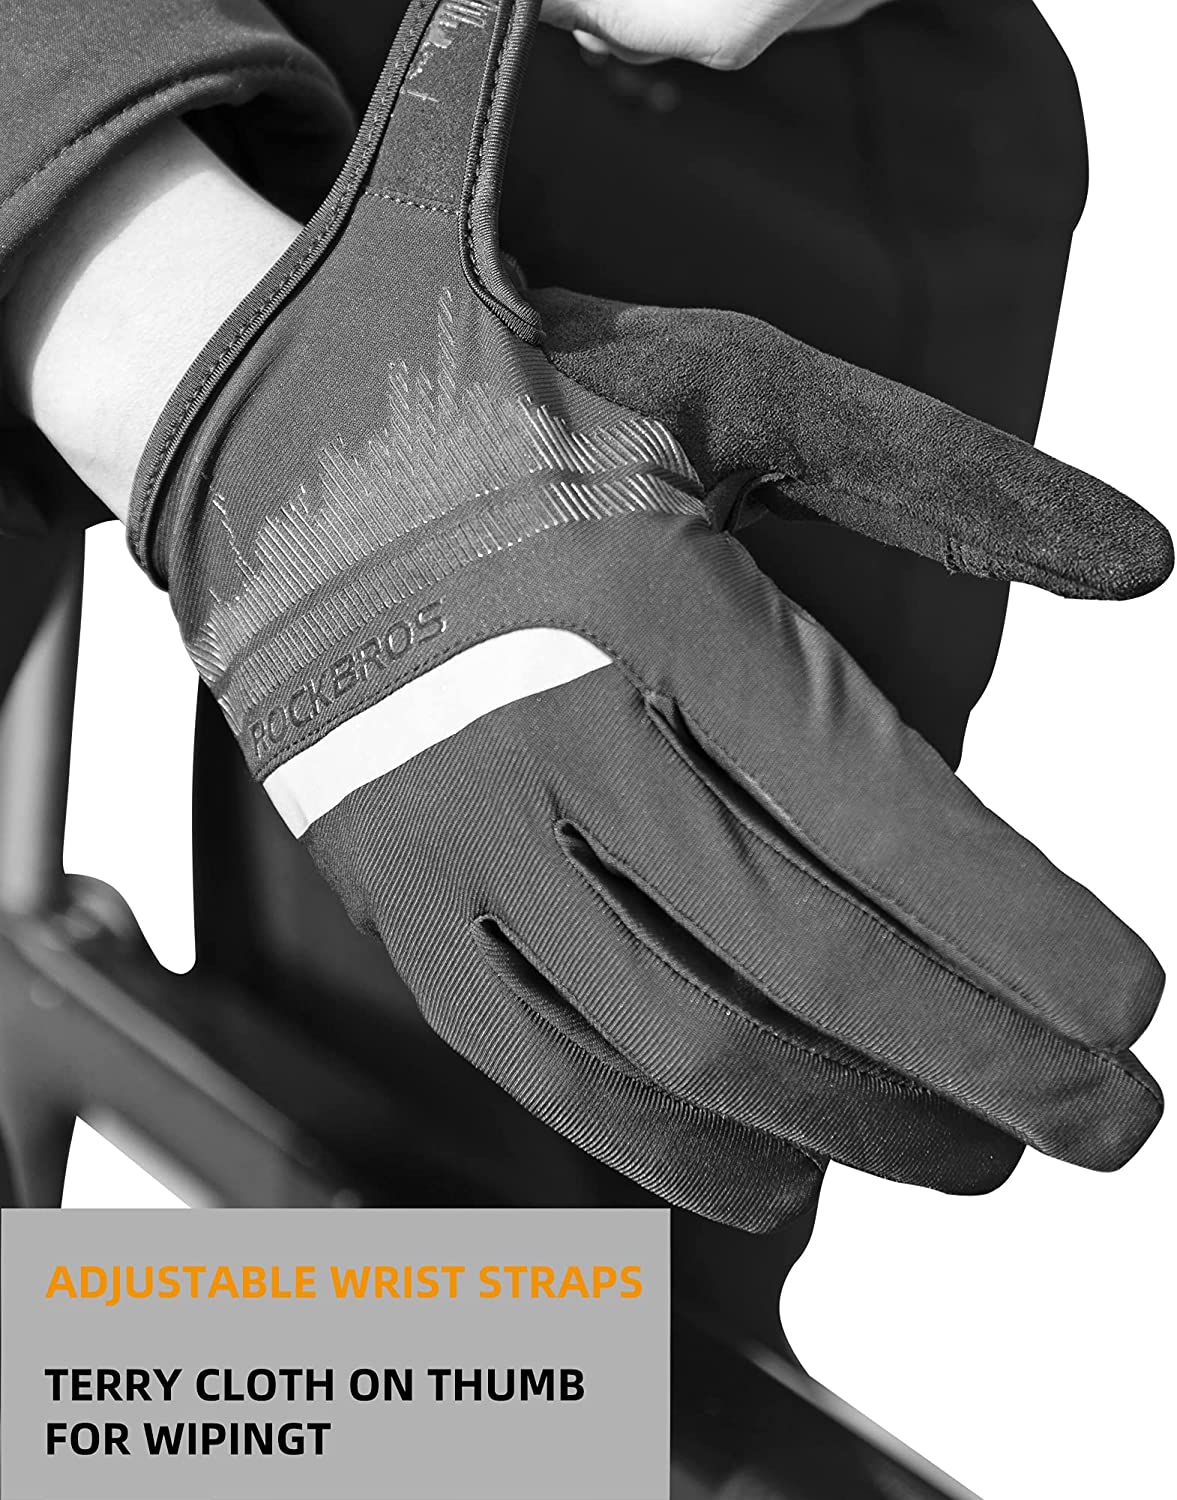 ROCKBROS Bike Gloves Mens Cycling Gloves Touch Screen Anti-Slip MTB Road Biking Gloves Breathable Full Finger Bicycle Gloves for Outdoor Sports